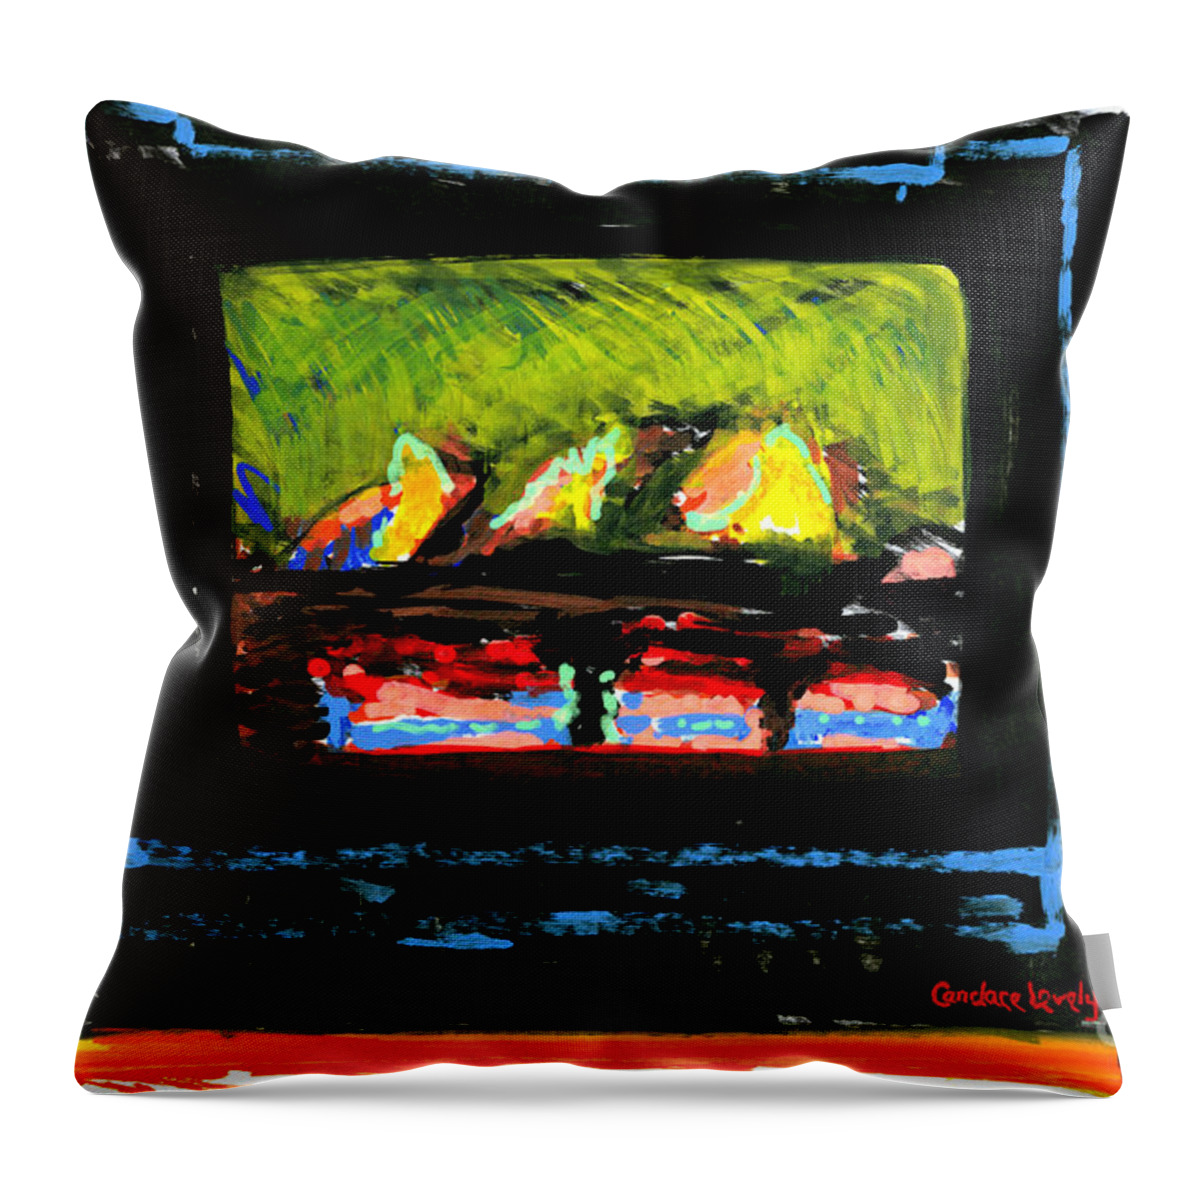 Fire Throw Pillow featuring the painting Lake Champlain Fireplace by Candace Lovely